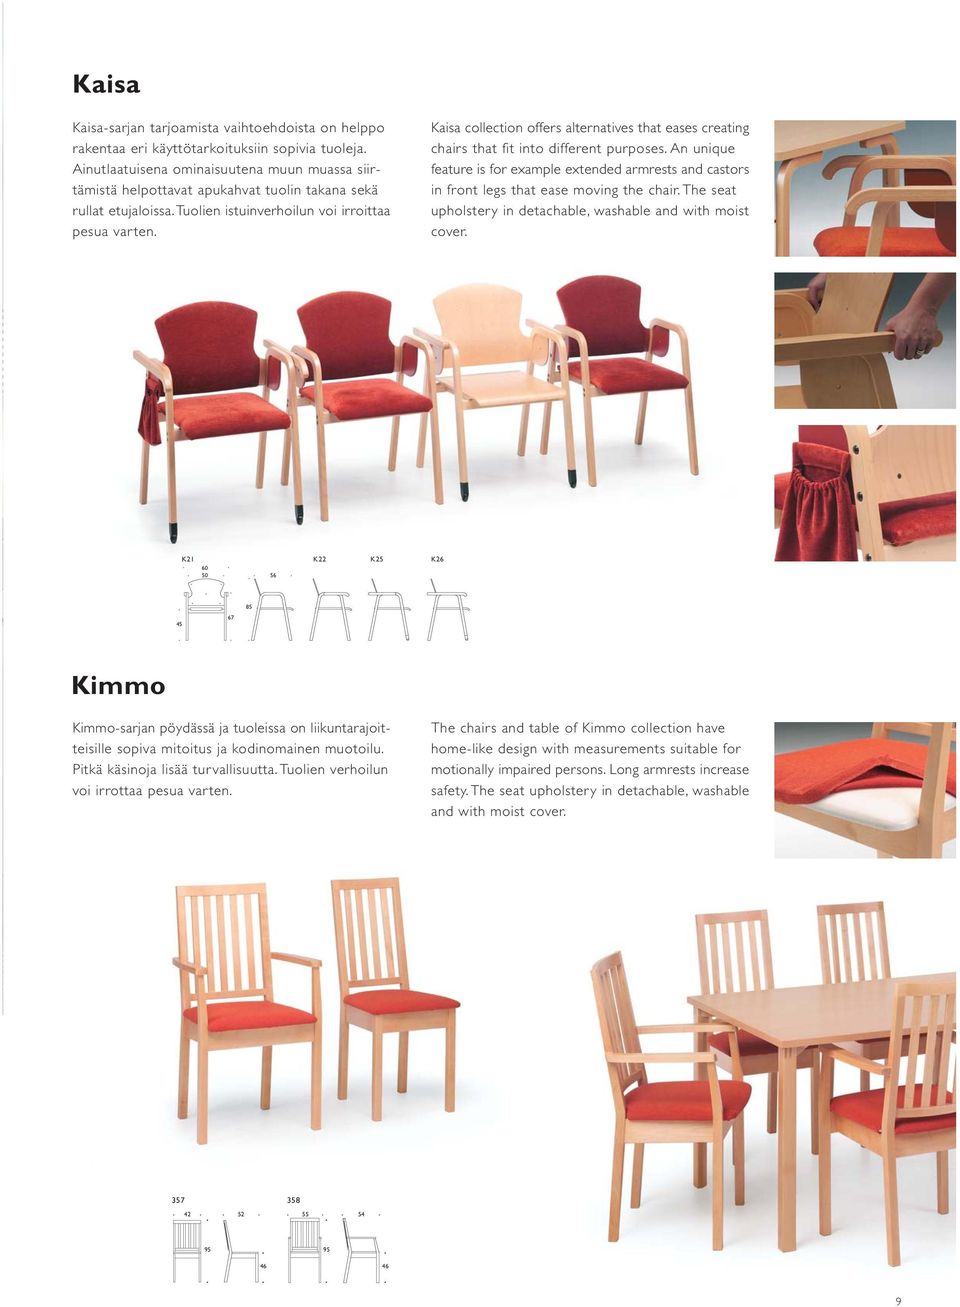 Kaisa collection offers alternatives that eases creating chairs that fit into different purposes.